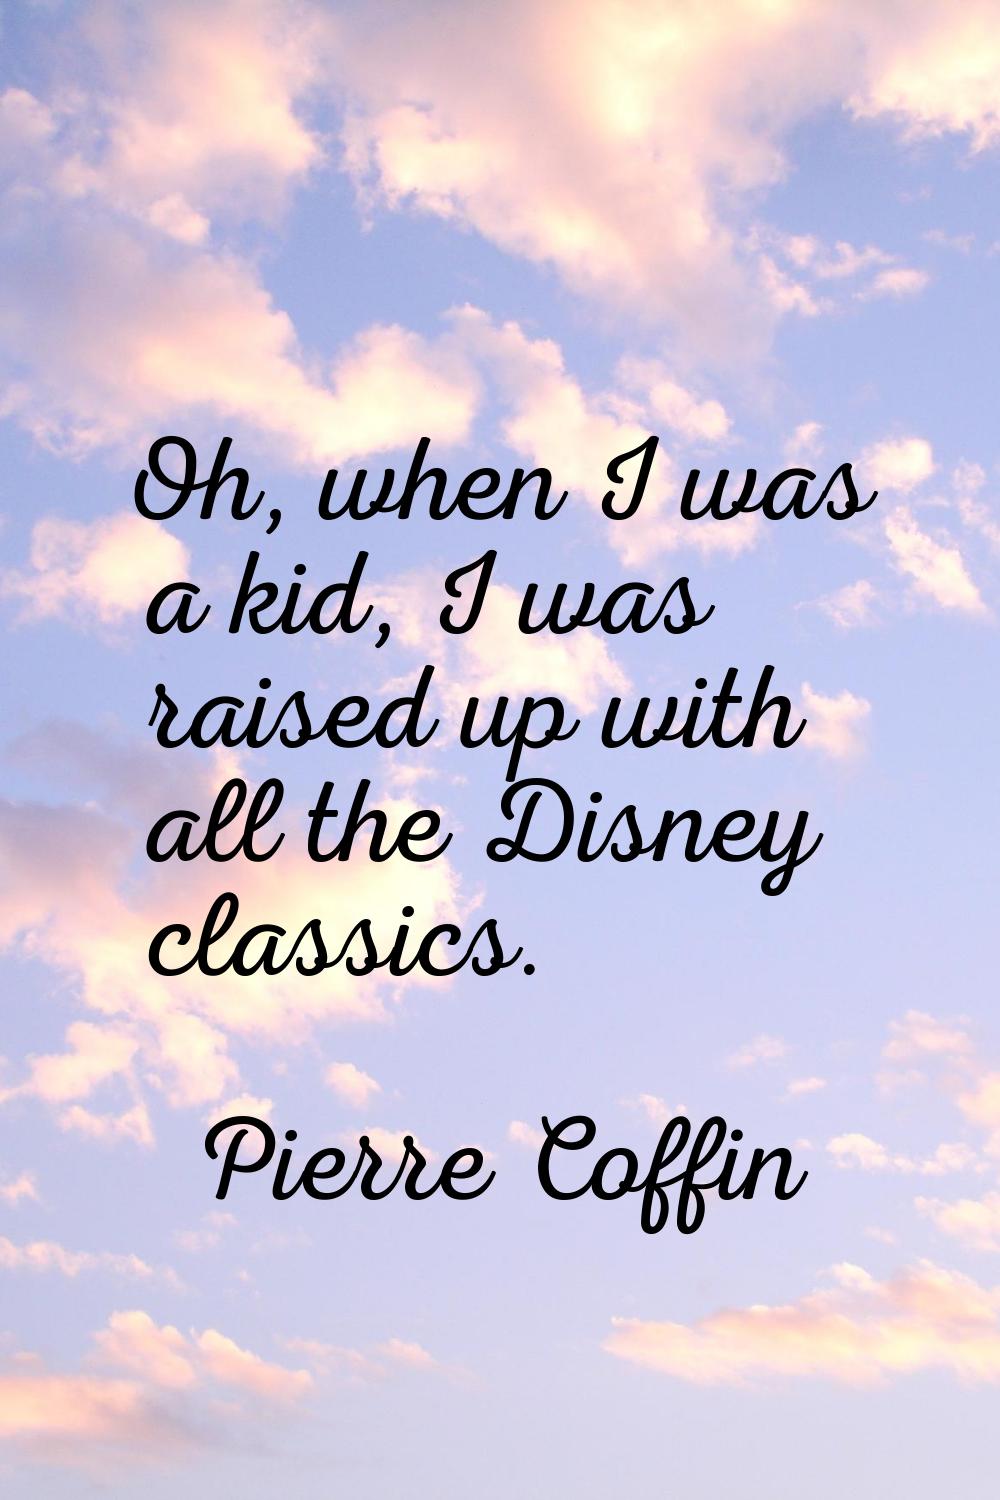 Oh, when I was a kid, I was raised up with all the Disney classics.